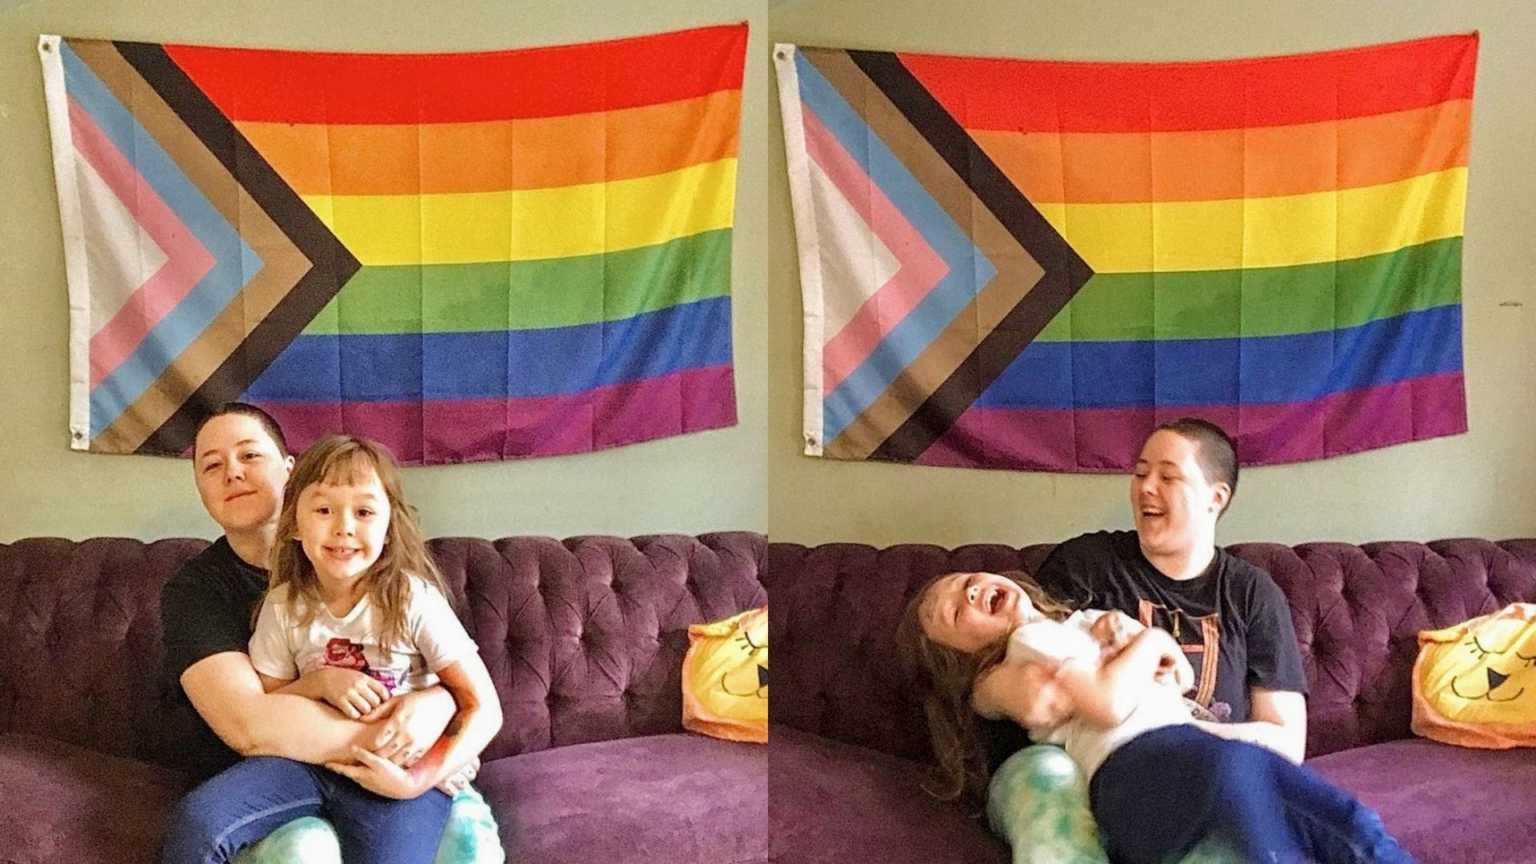 ‘My mom is a THEY, not a boy or a girl.’ Nonbinary parent celebrates